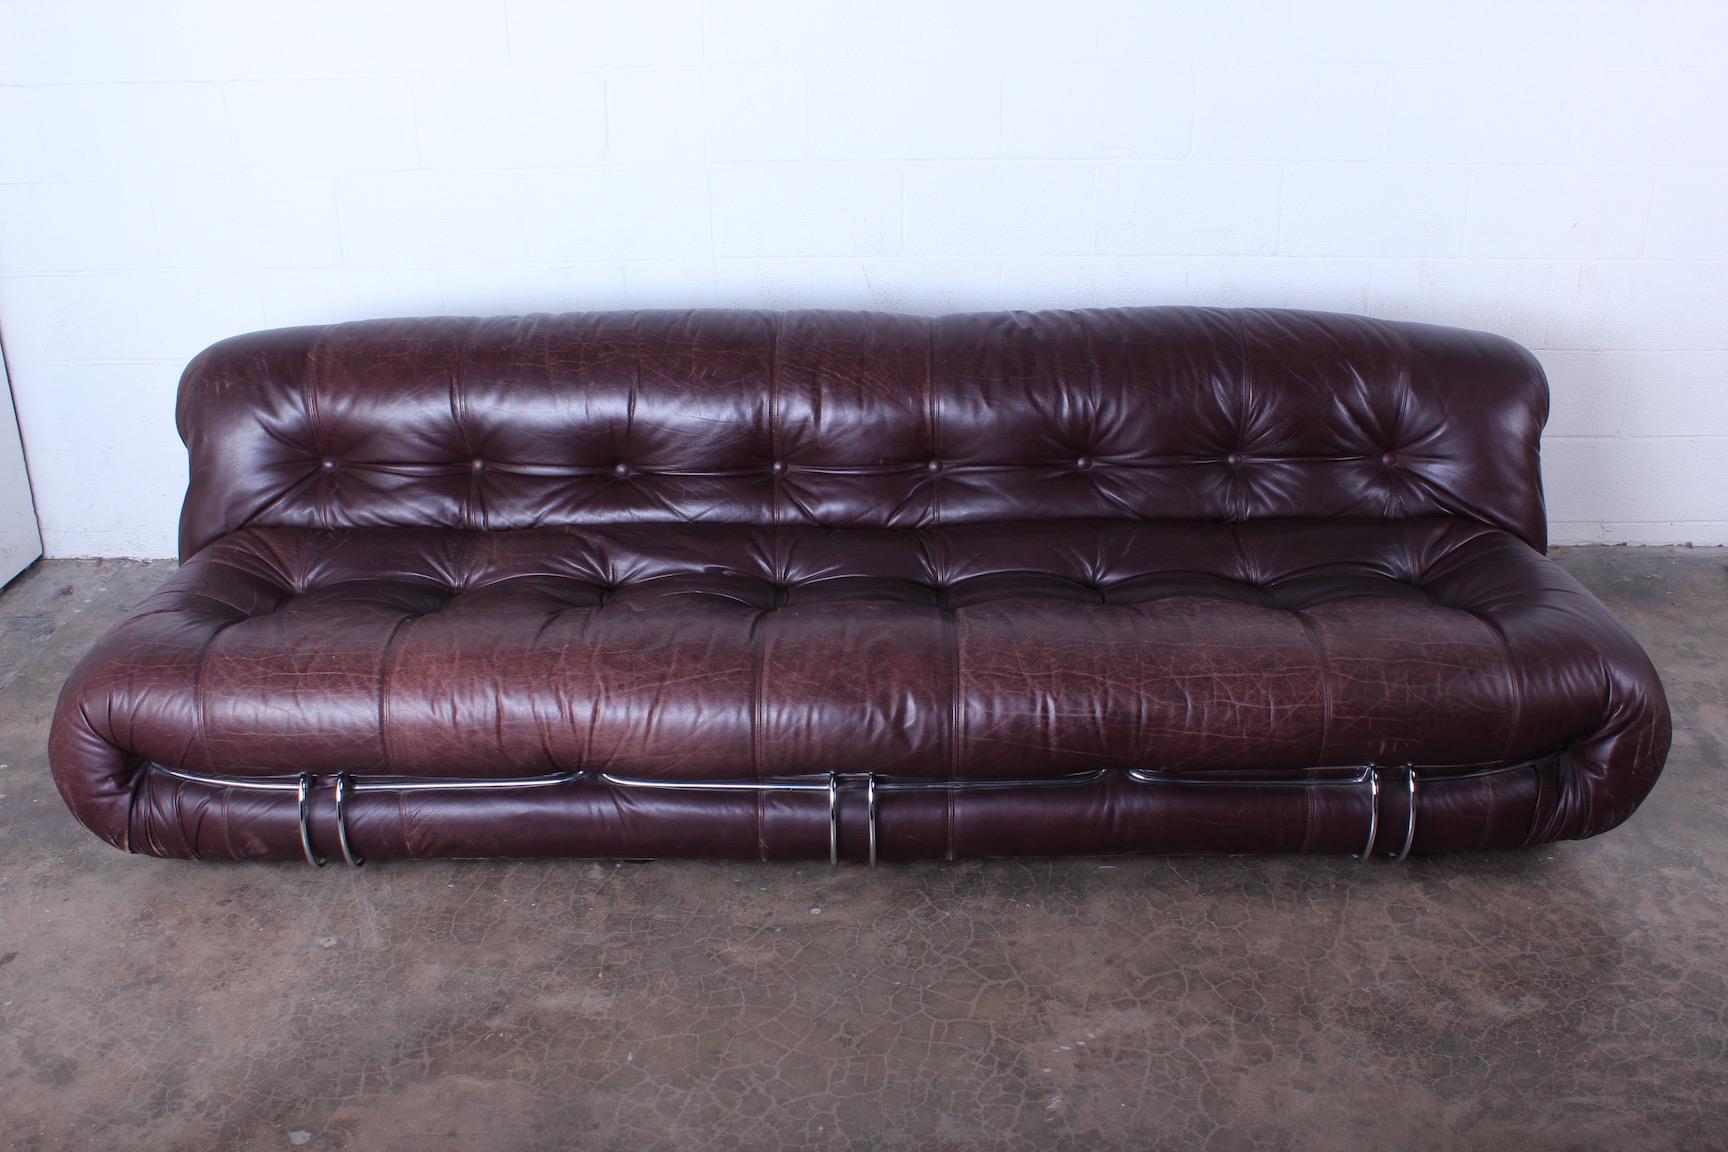 A beautifully patinated leather Soriana sofa designed by Afra & Tobia Scarpa for Cassina.